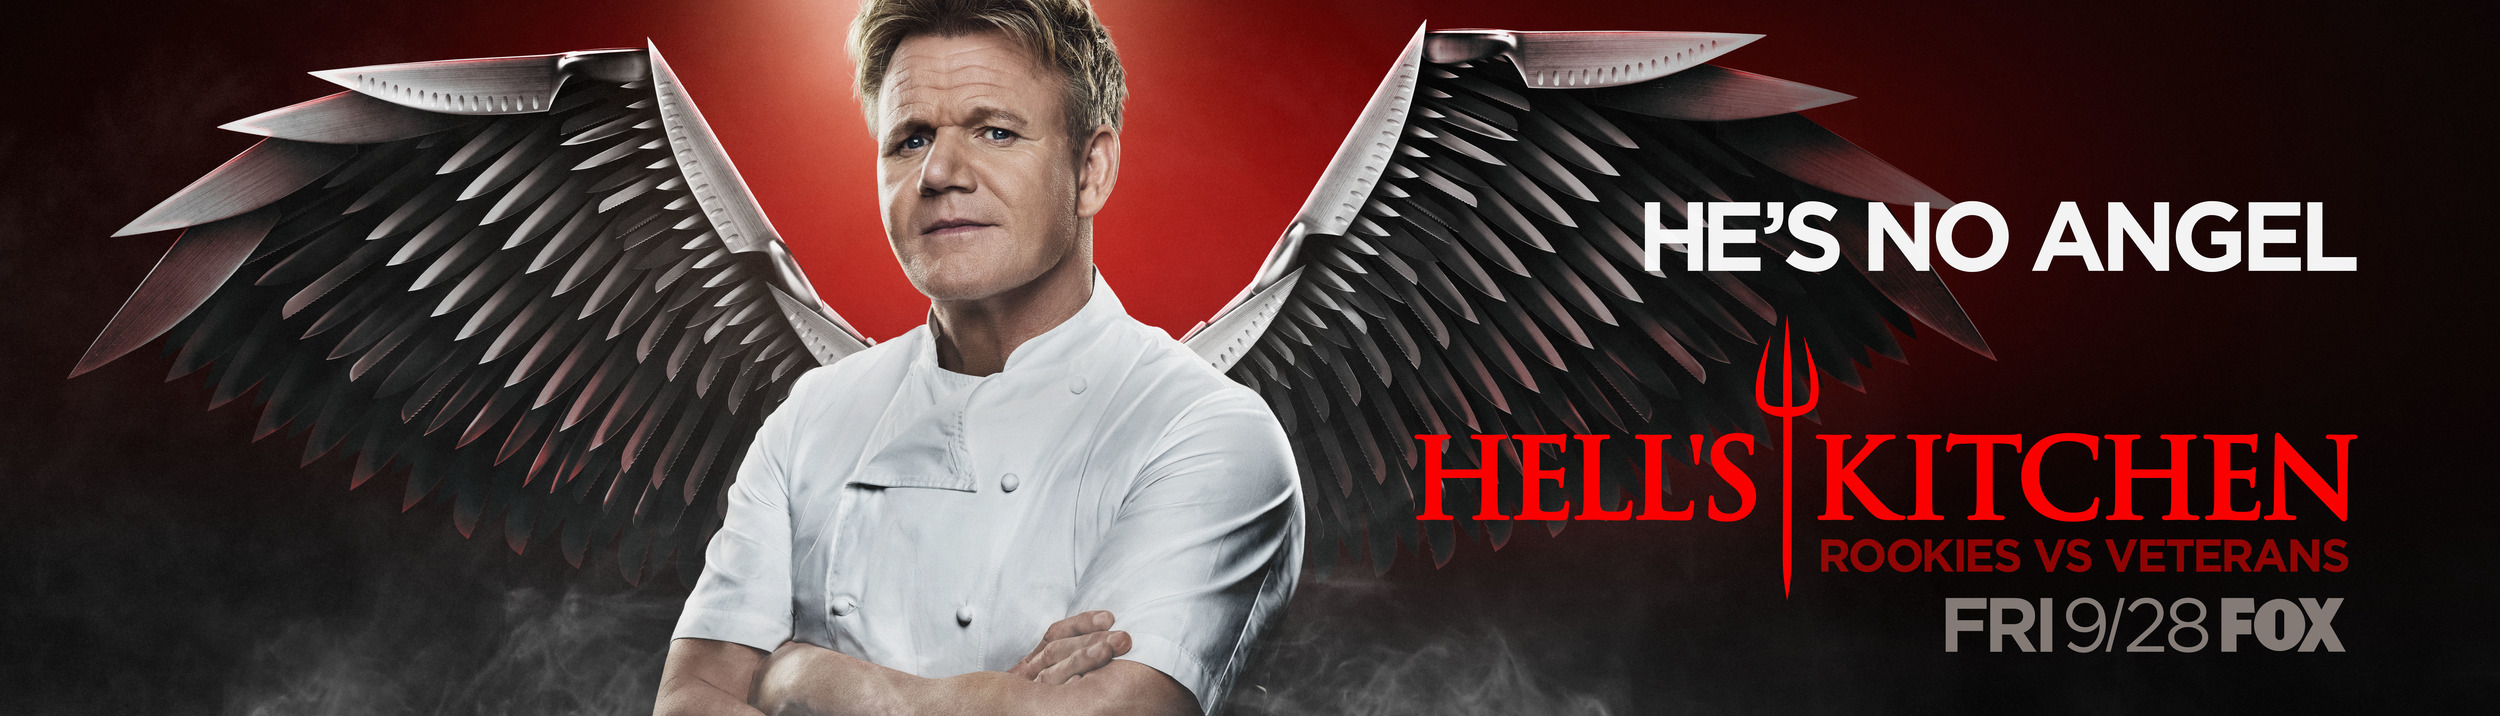 Mega Sized TV Poster Image for Hell's Kitchen (#8 of 10)